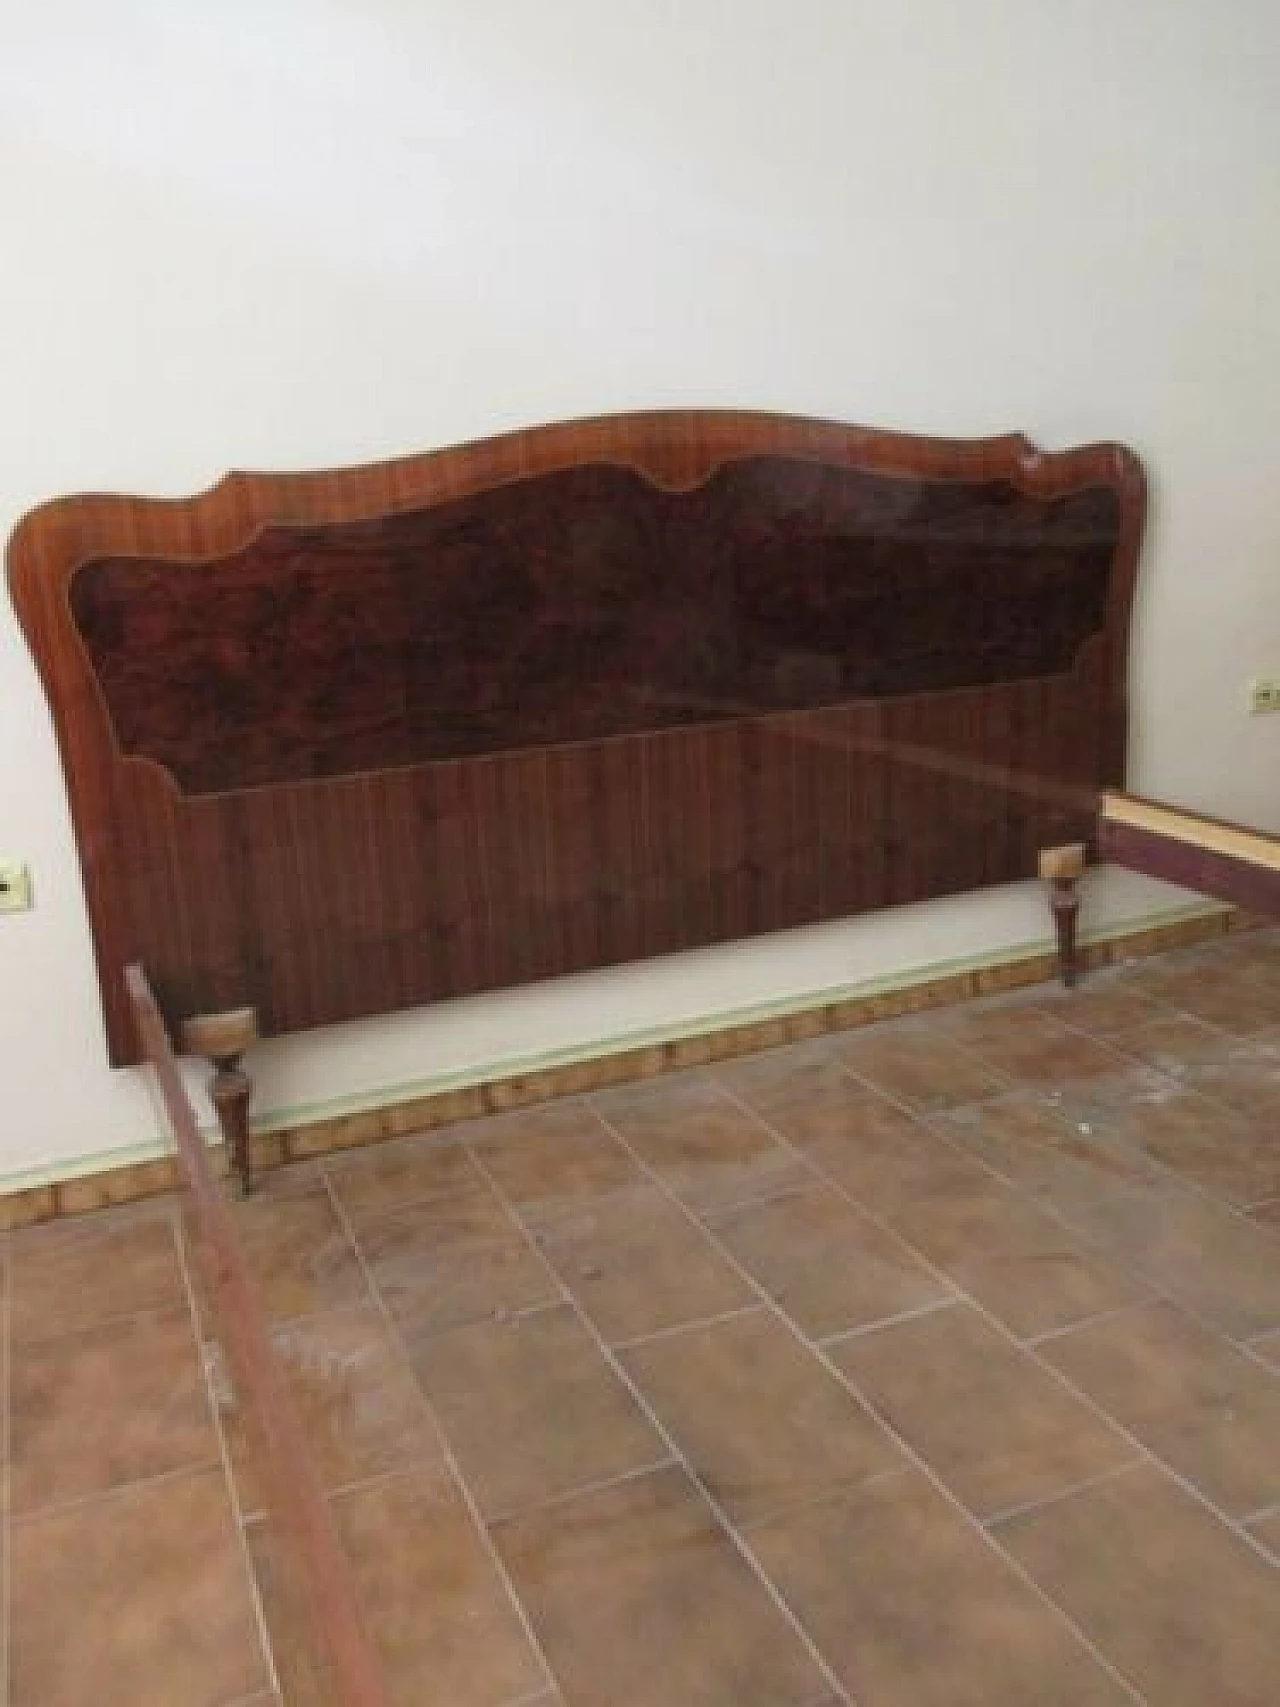 Rosewood double bed with inlays, 1950s 1330780